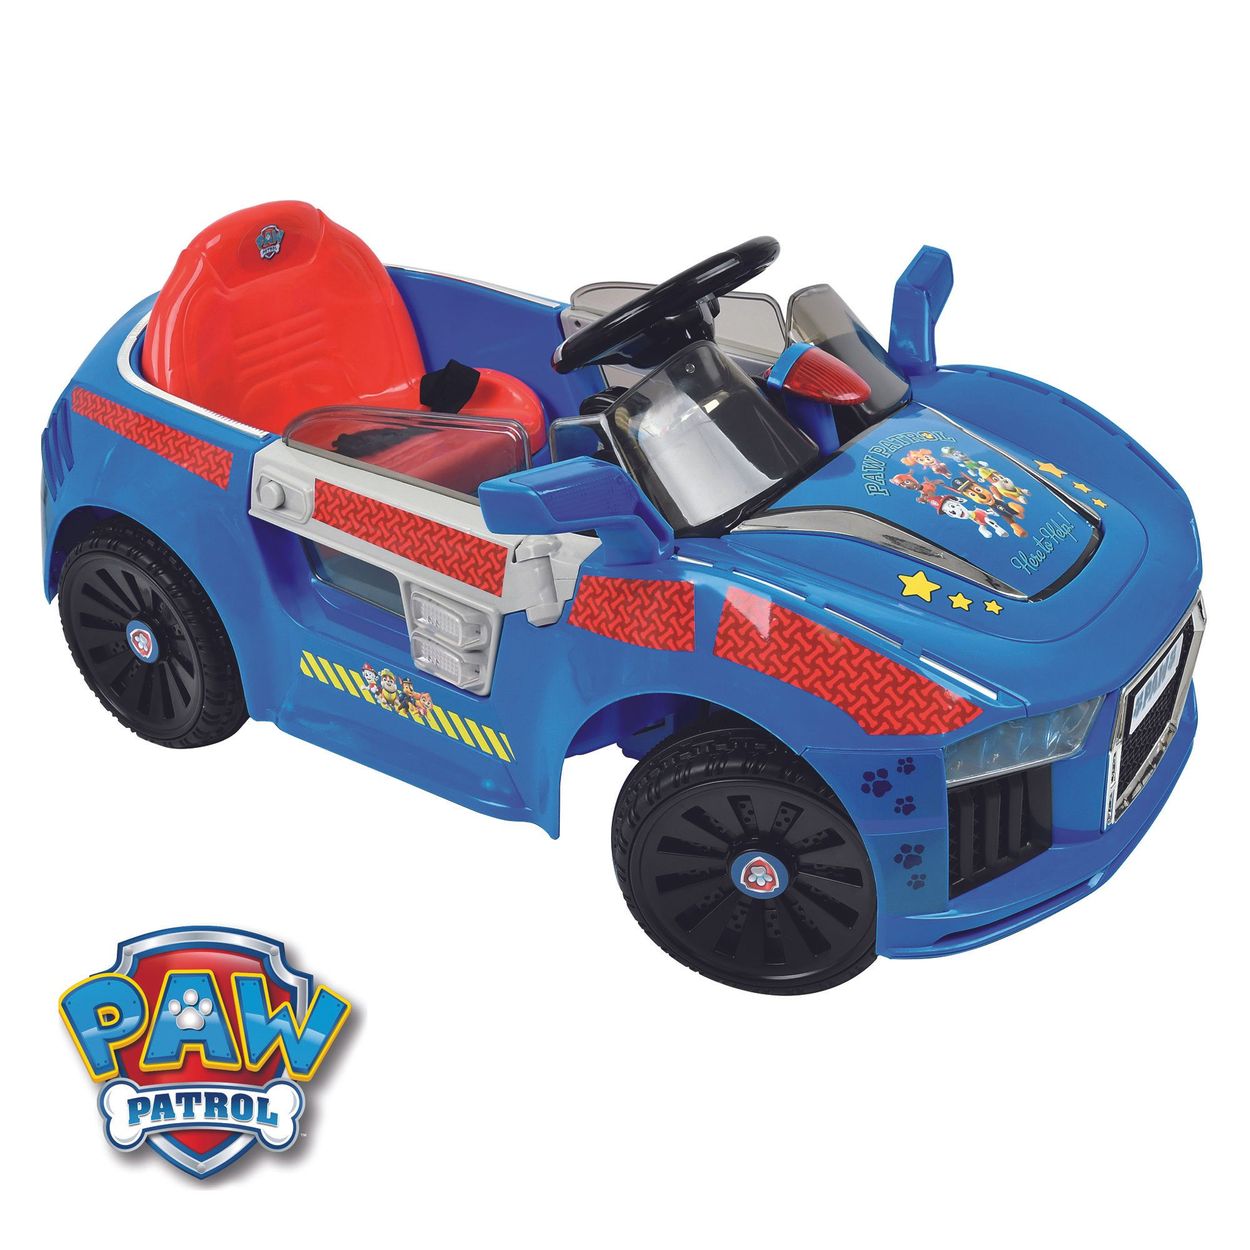 Ledsager spand Countryside Paw Patrol E-Cruiser Ride-On Car, Blue | Costco